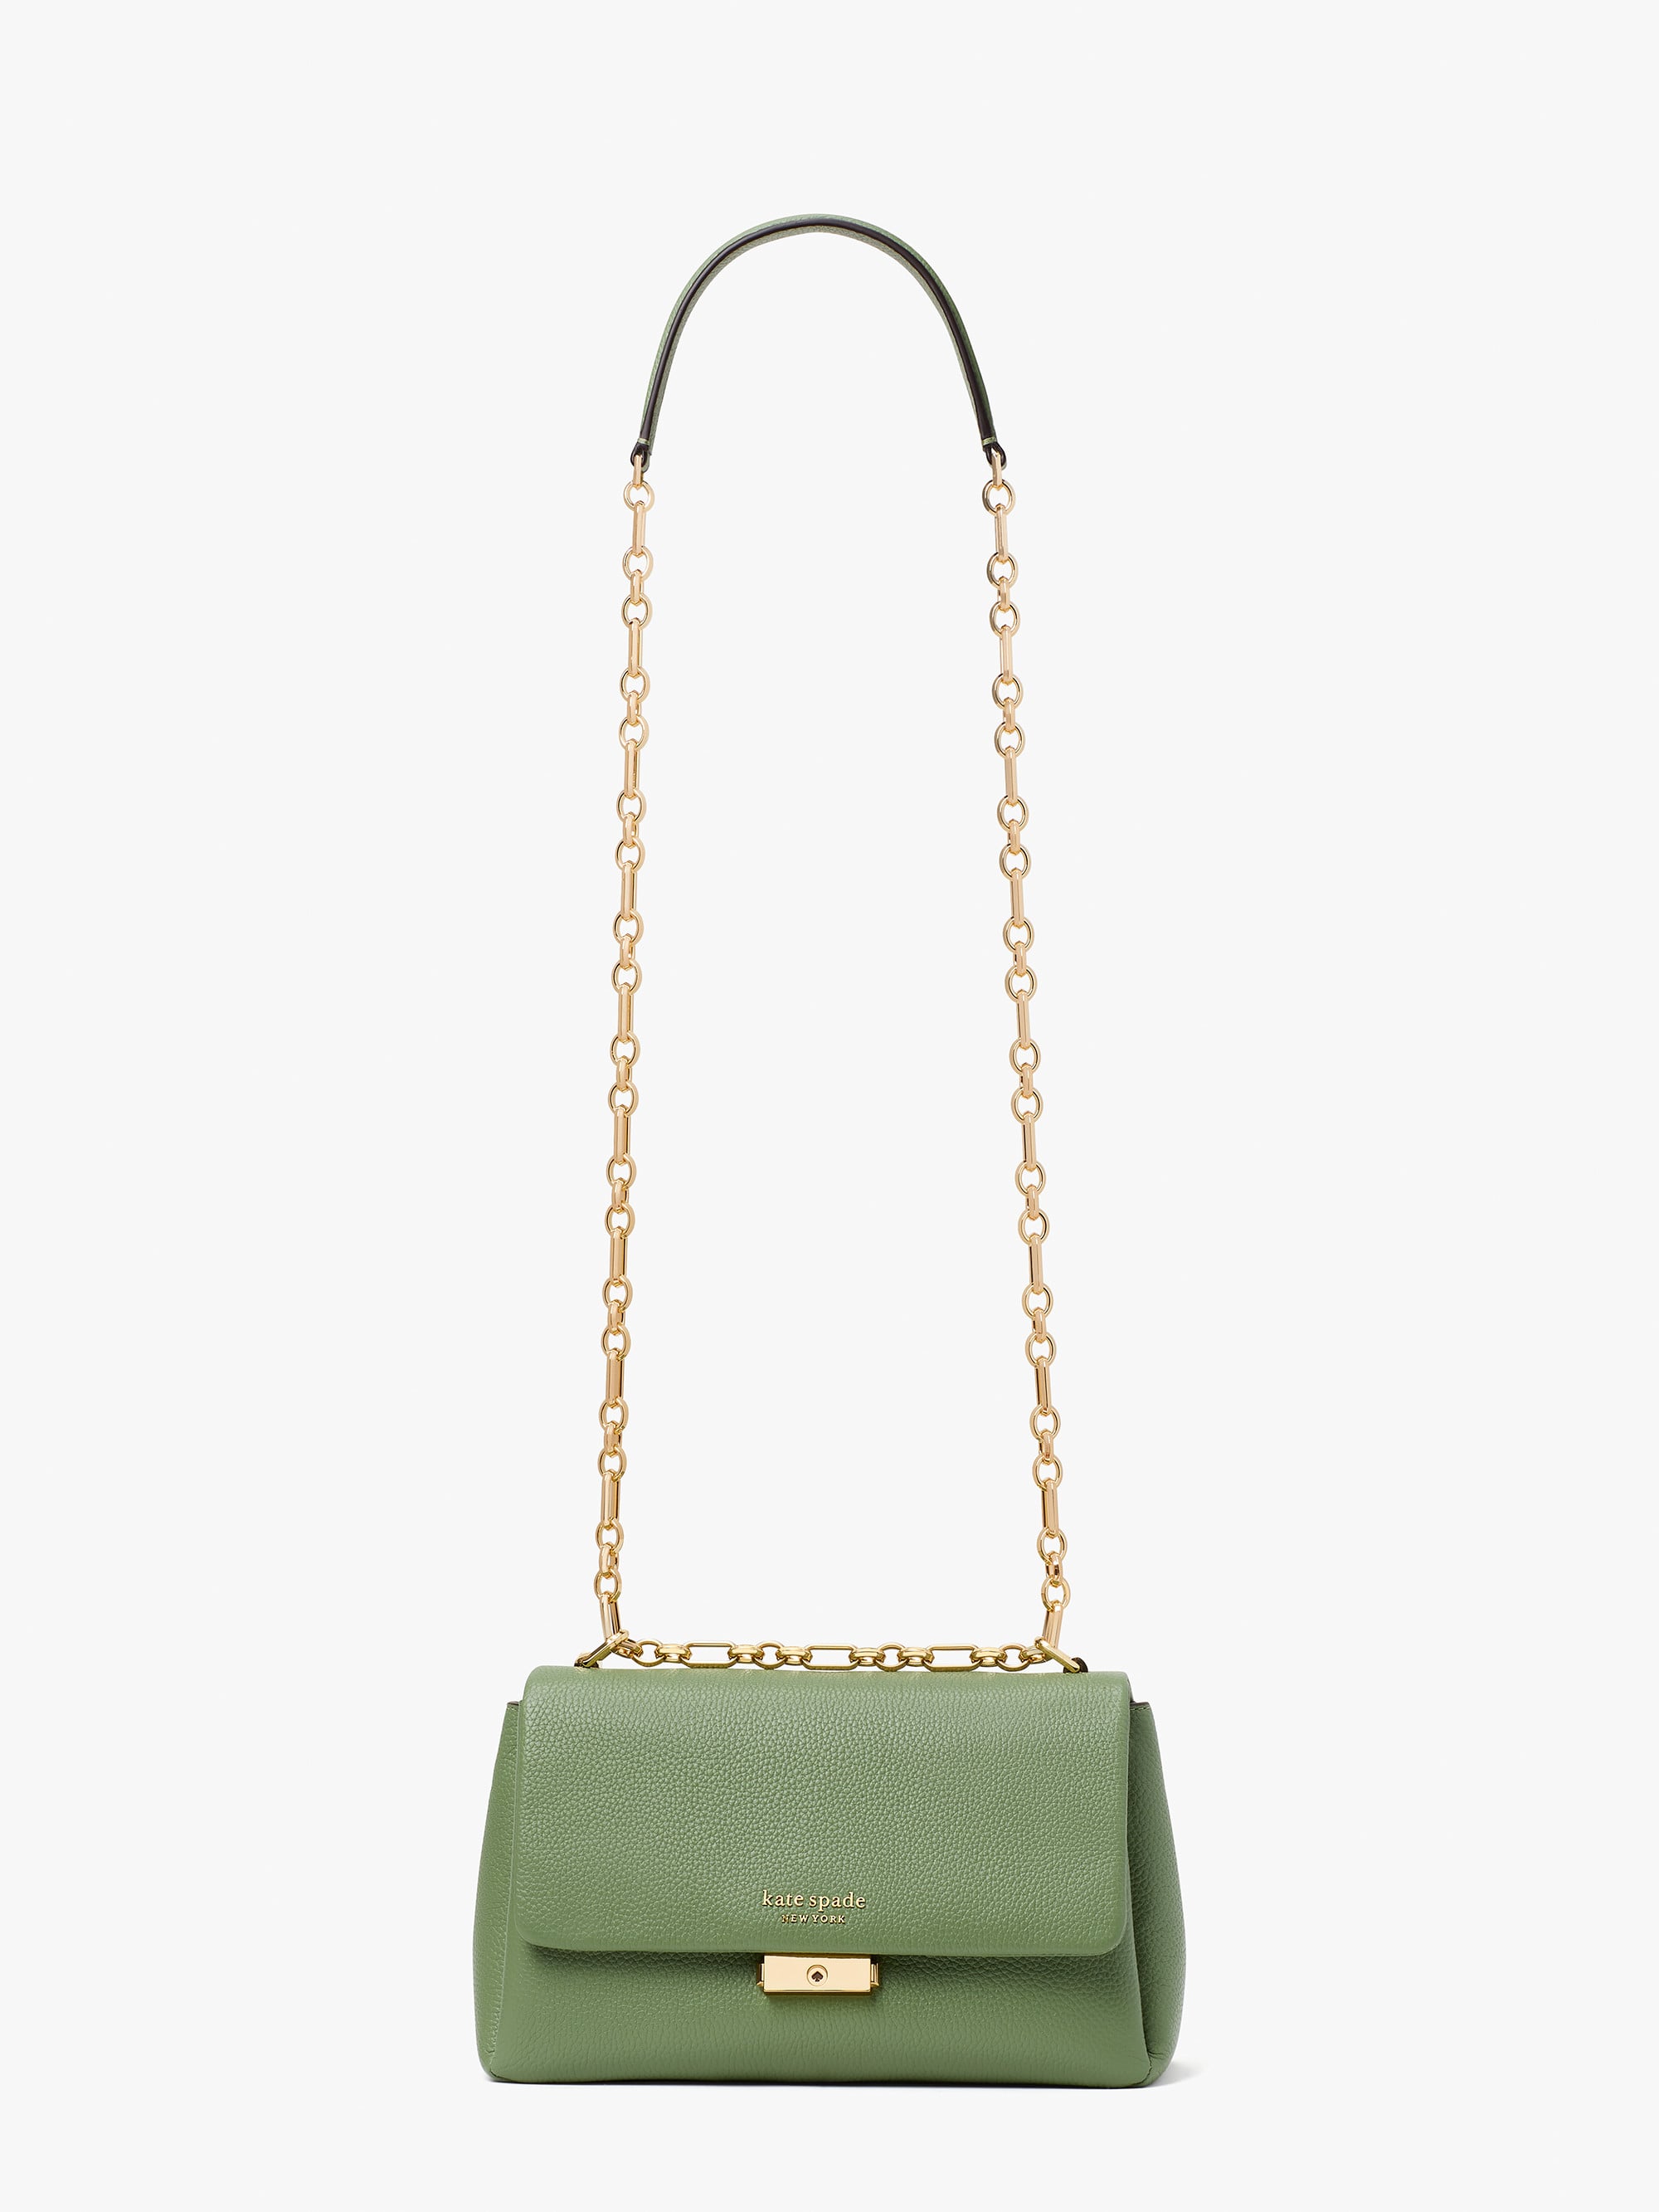 Small Convertible Chain Shoulder Bag by kate spade new york